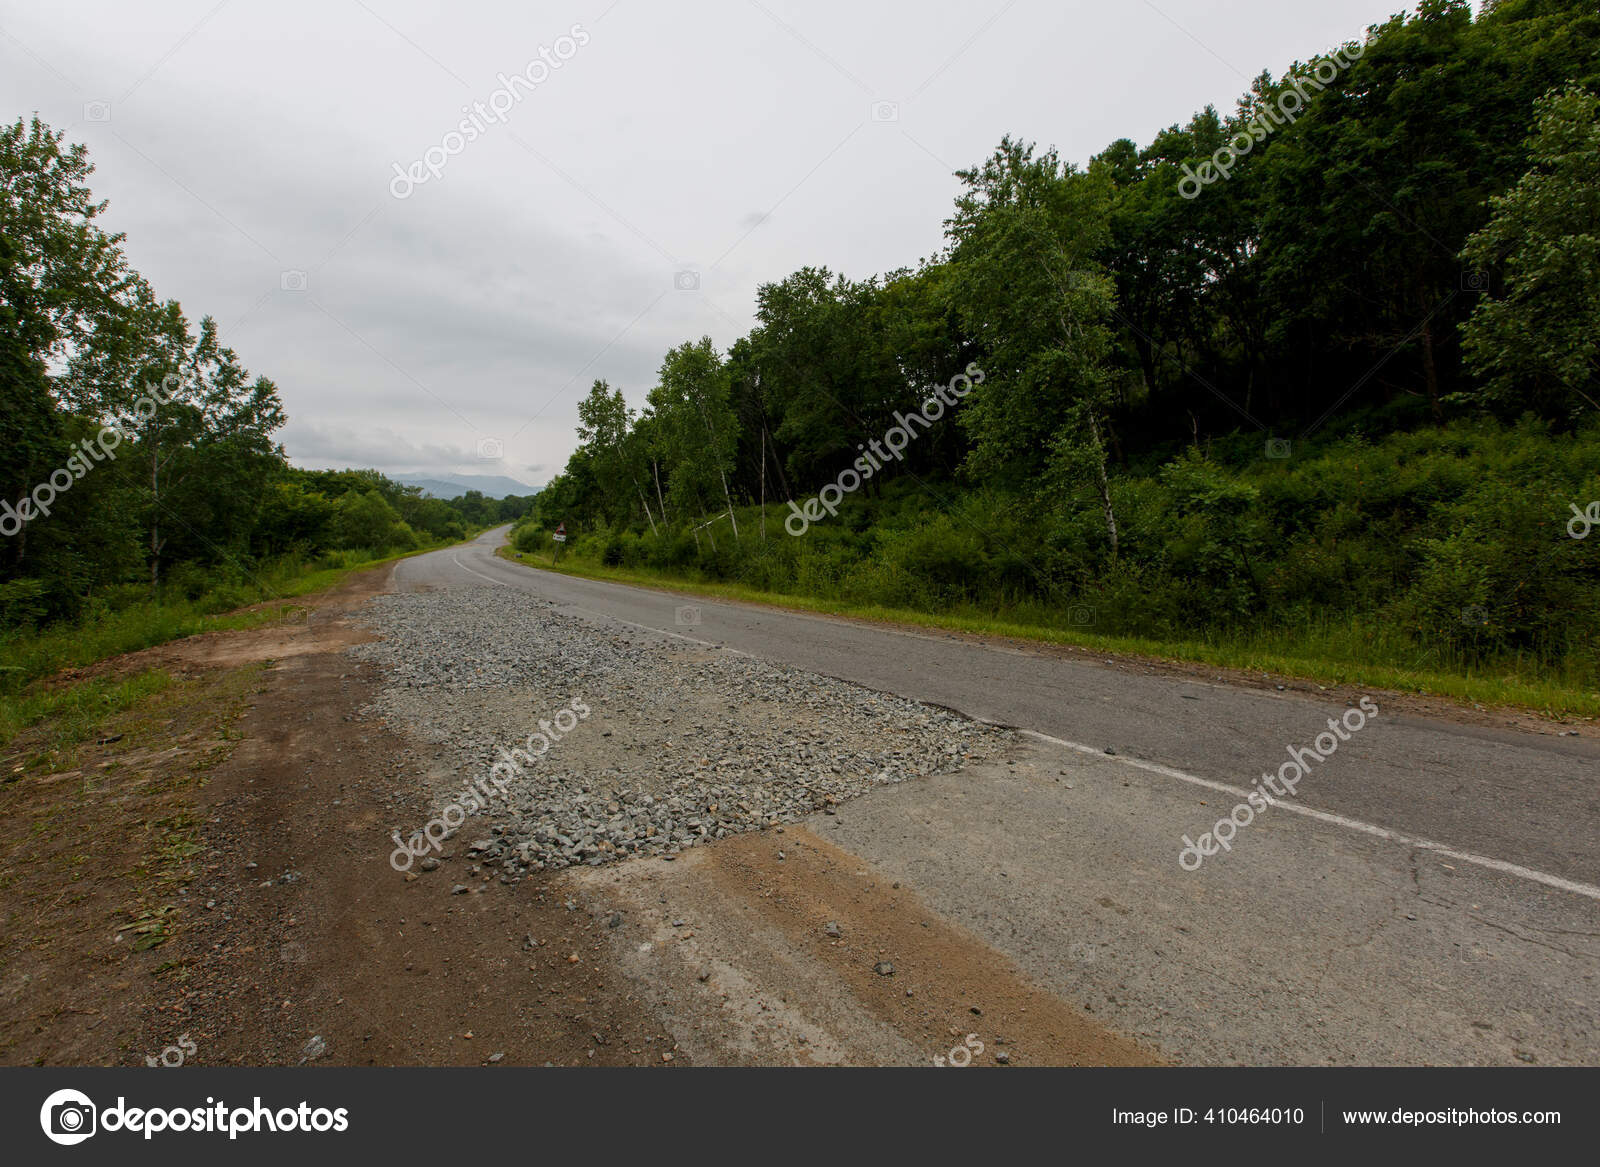 Very Bad Road In Russia The Asphalt Road Is All In Holes In The Middle Of The Forest Stock Photo By C Primdiscovery